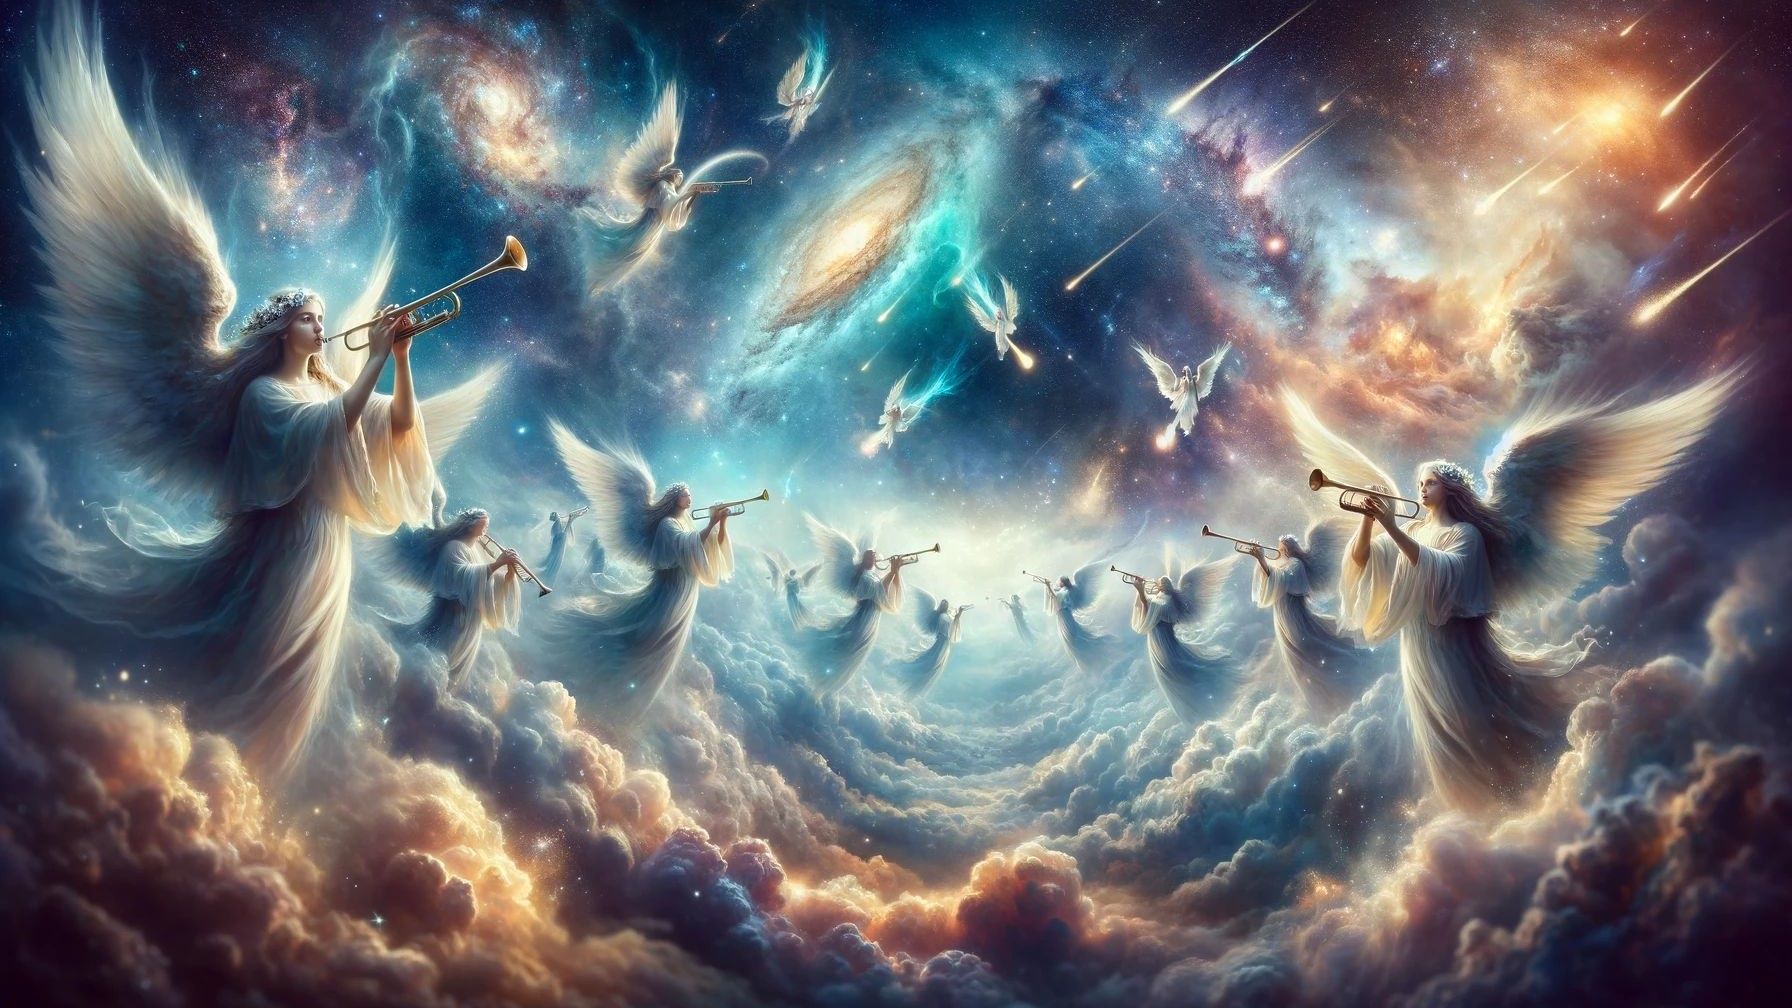 What Does The Book Of Revelation Say About Trumpets In The Sky